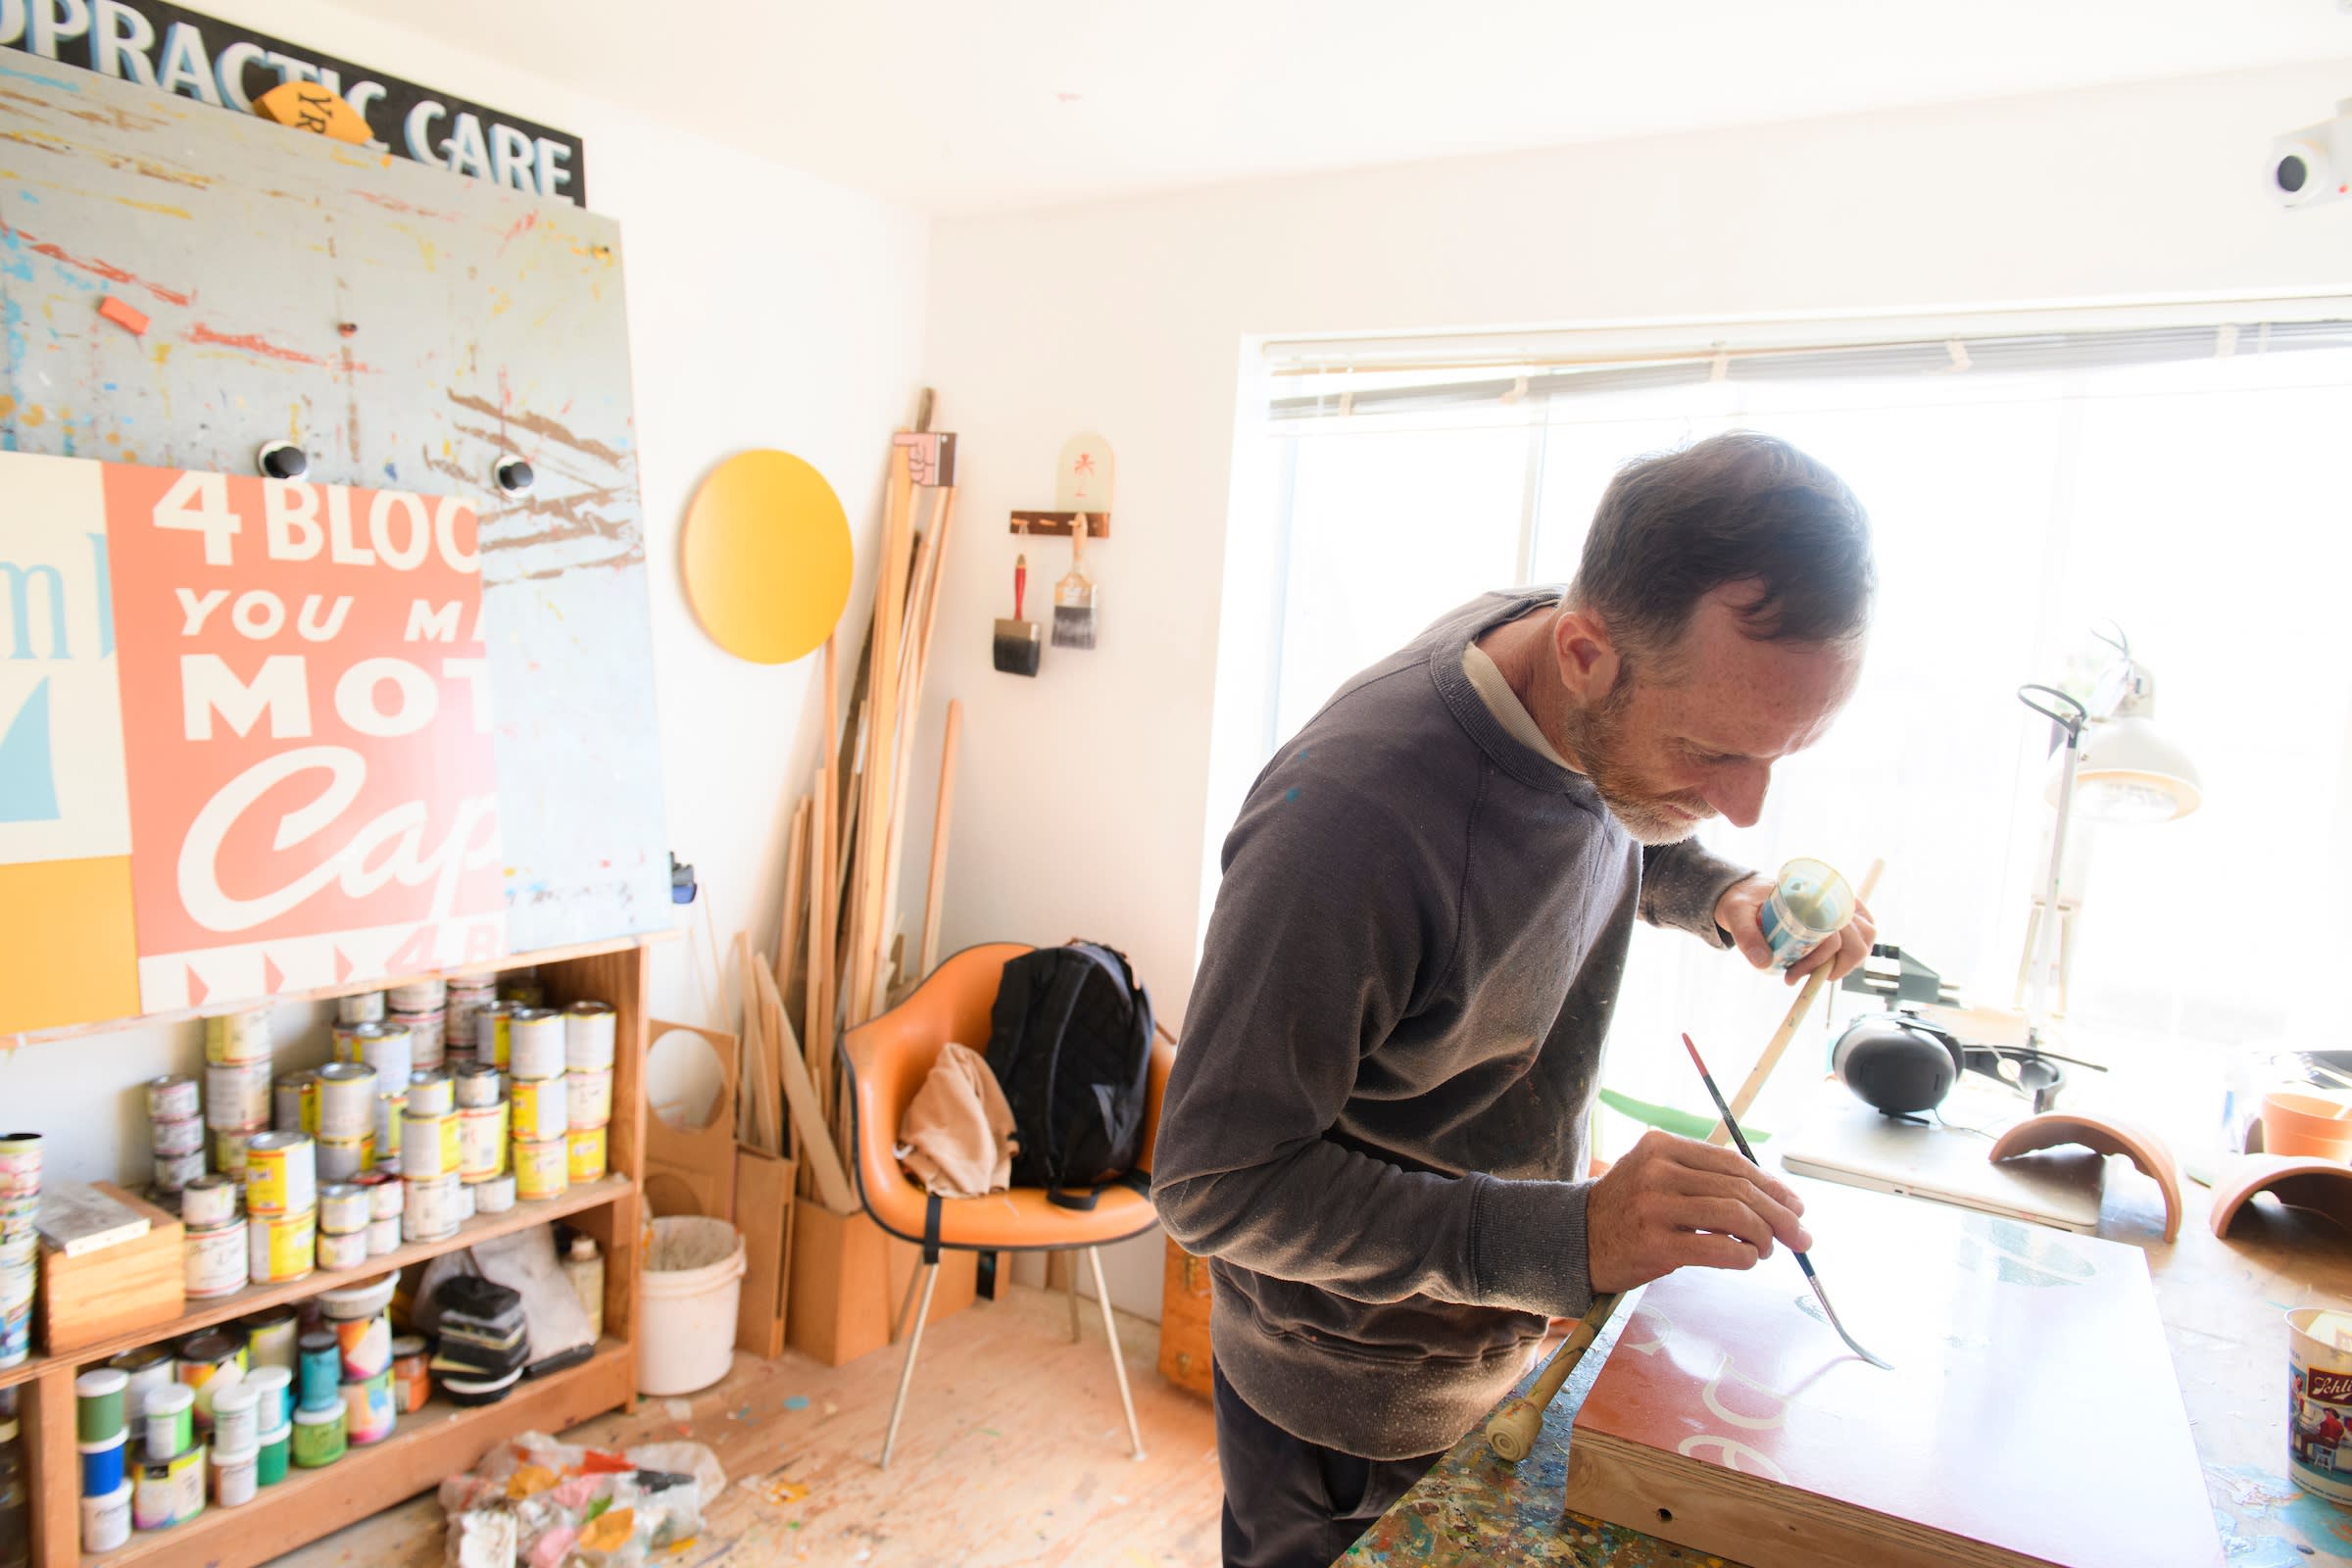 Jeff Canham in his studio - working on a painting